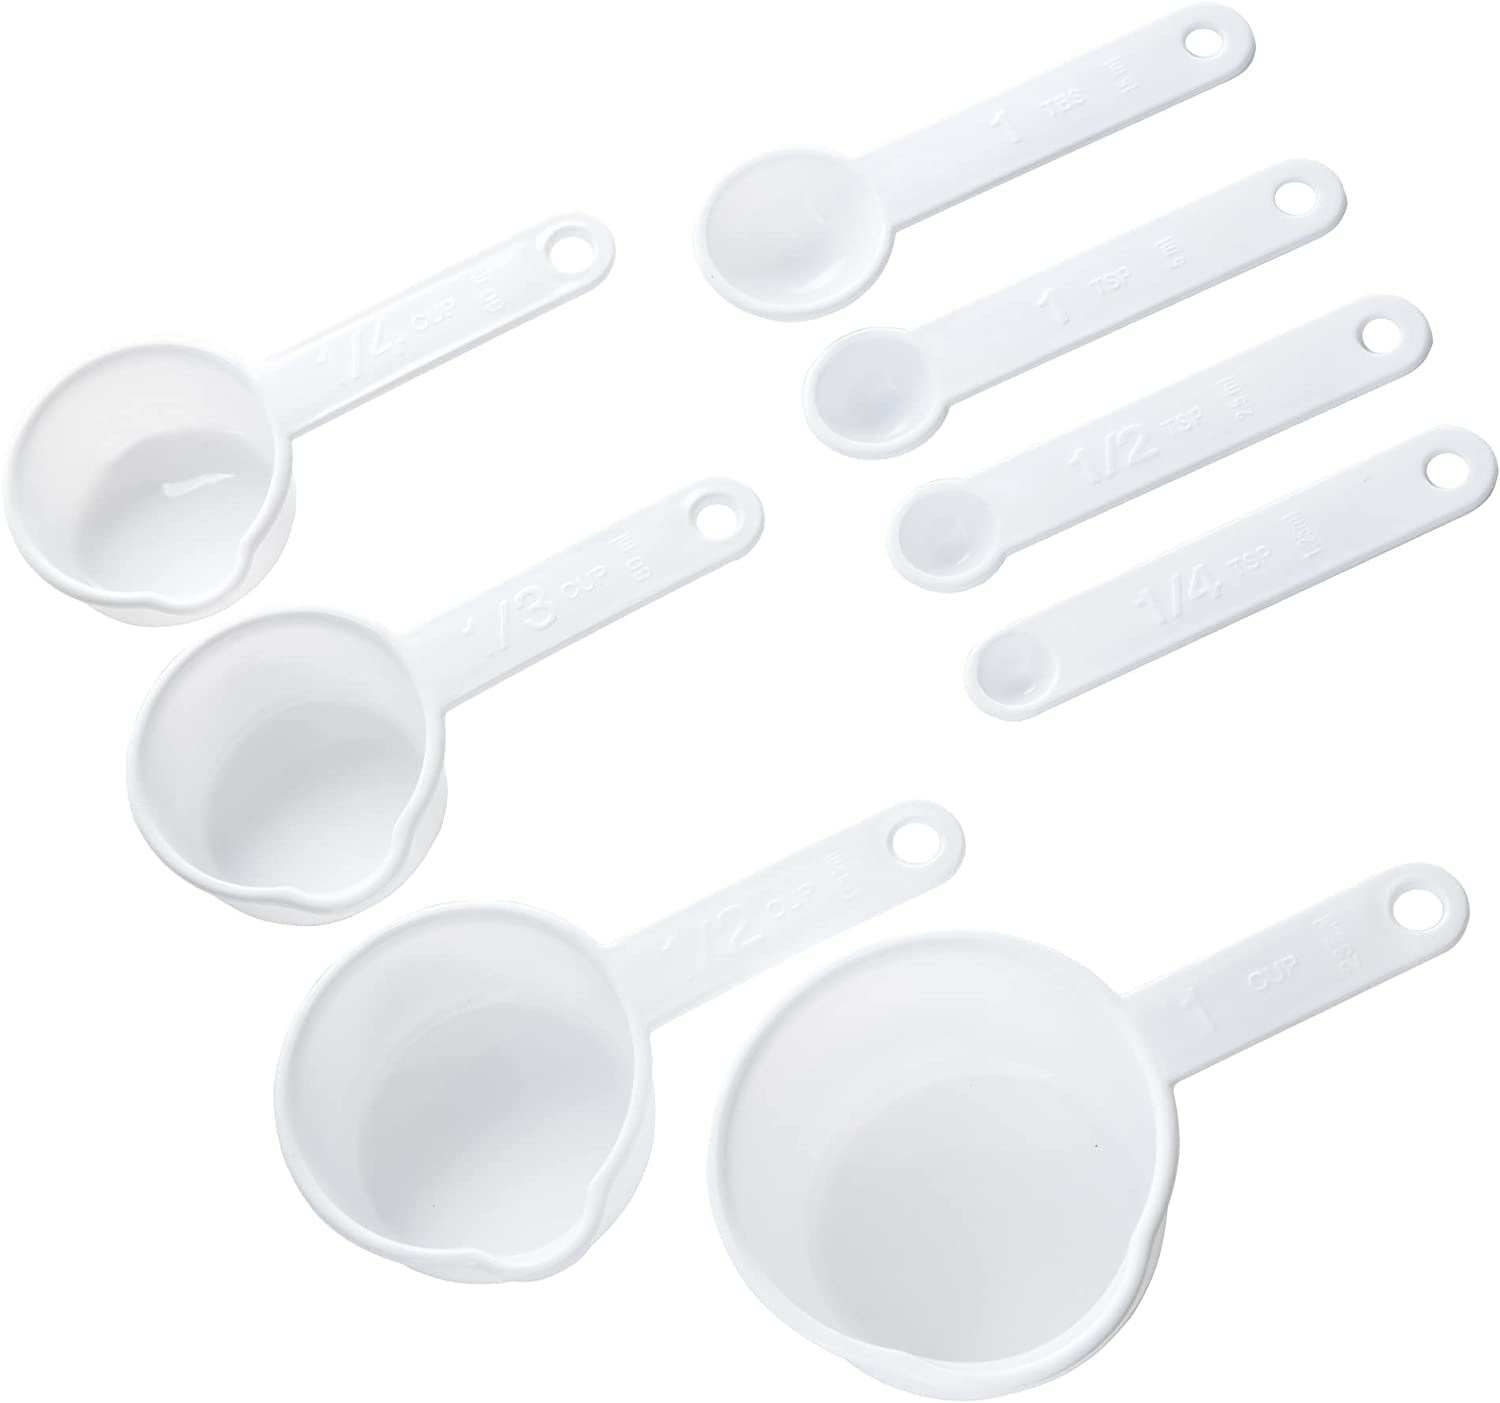 Adjustable Measuring Cup and Spoon Minimalist Space Saving Black and White  2 in 1 with tsp, tbsp, c and oz measurements - Cuchara y taza medidora